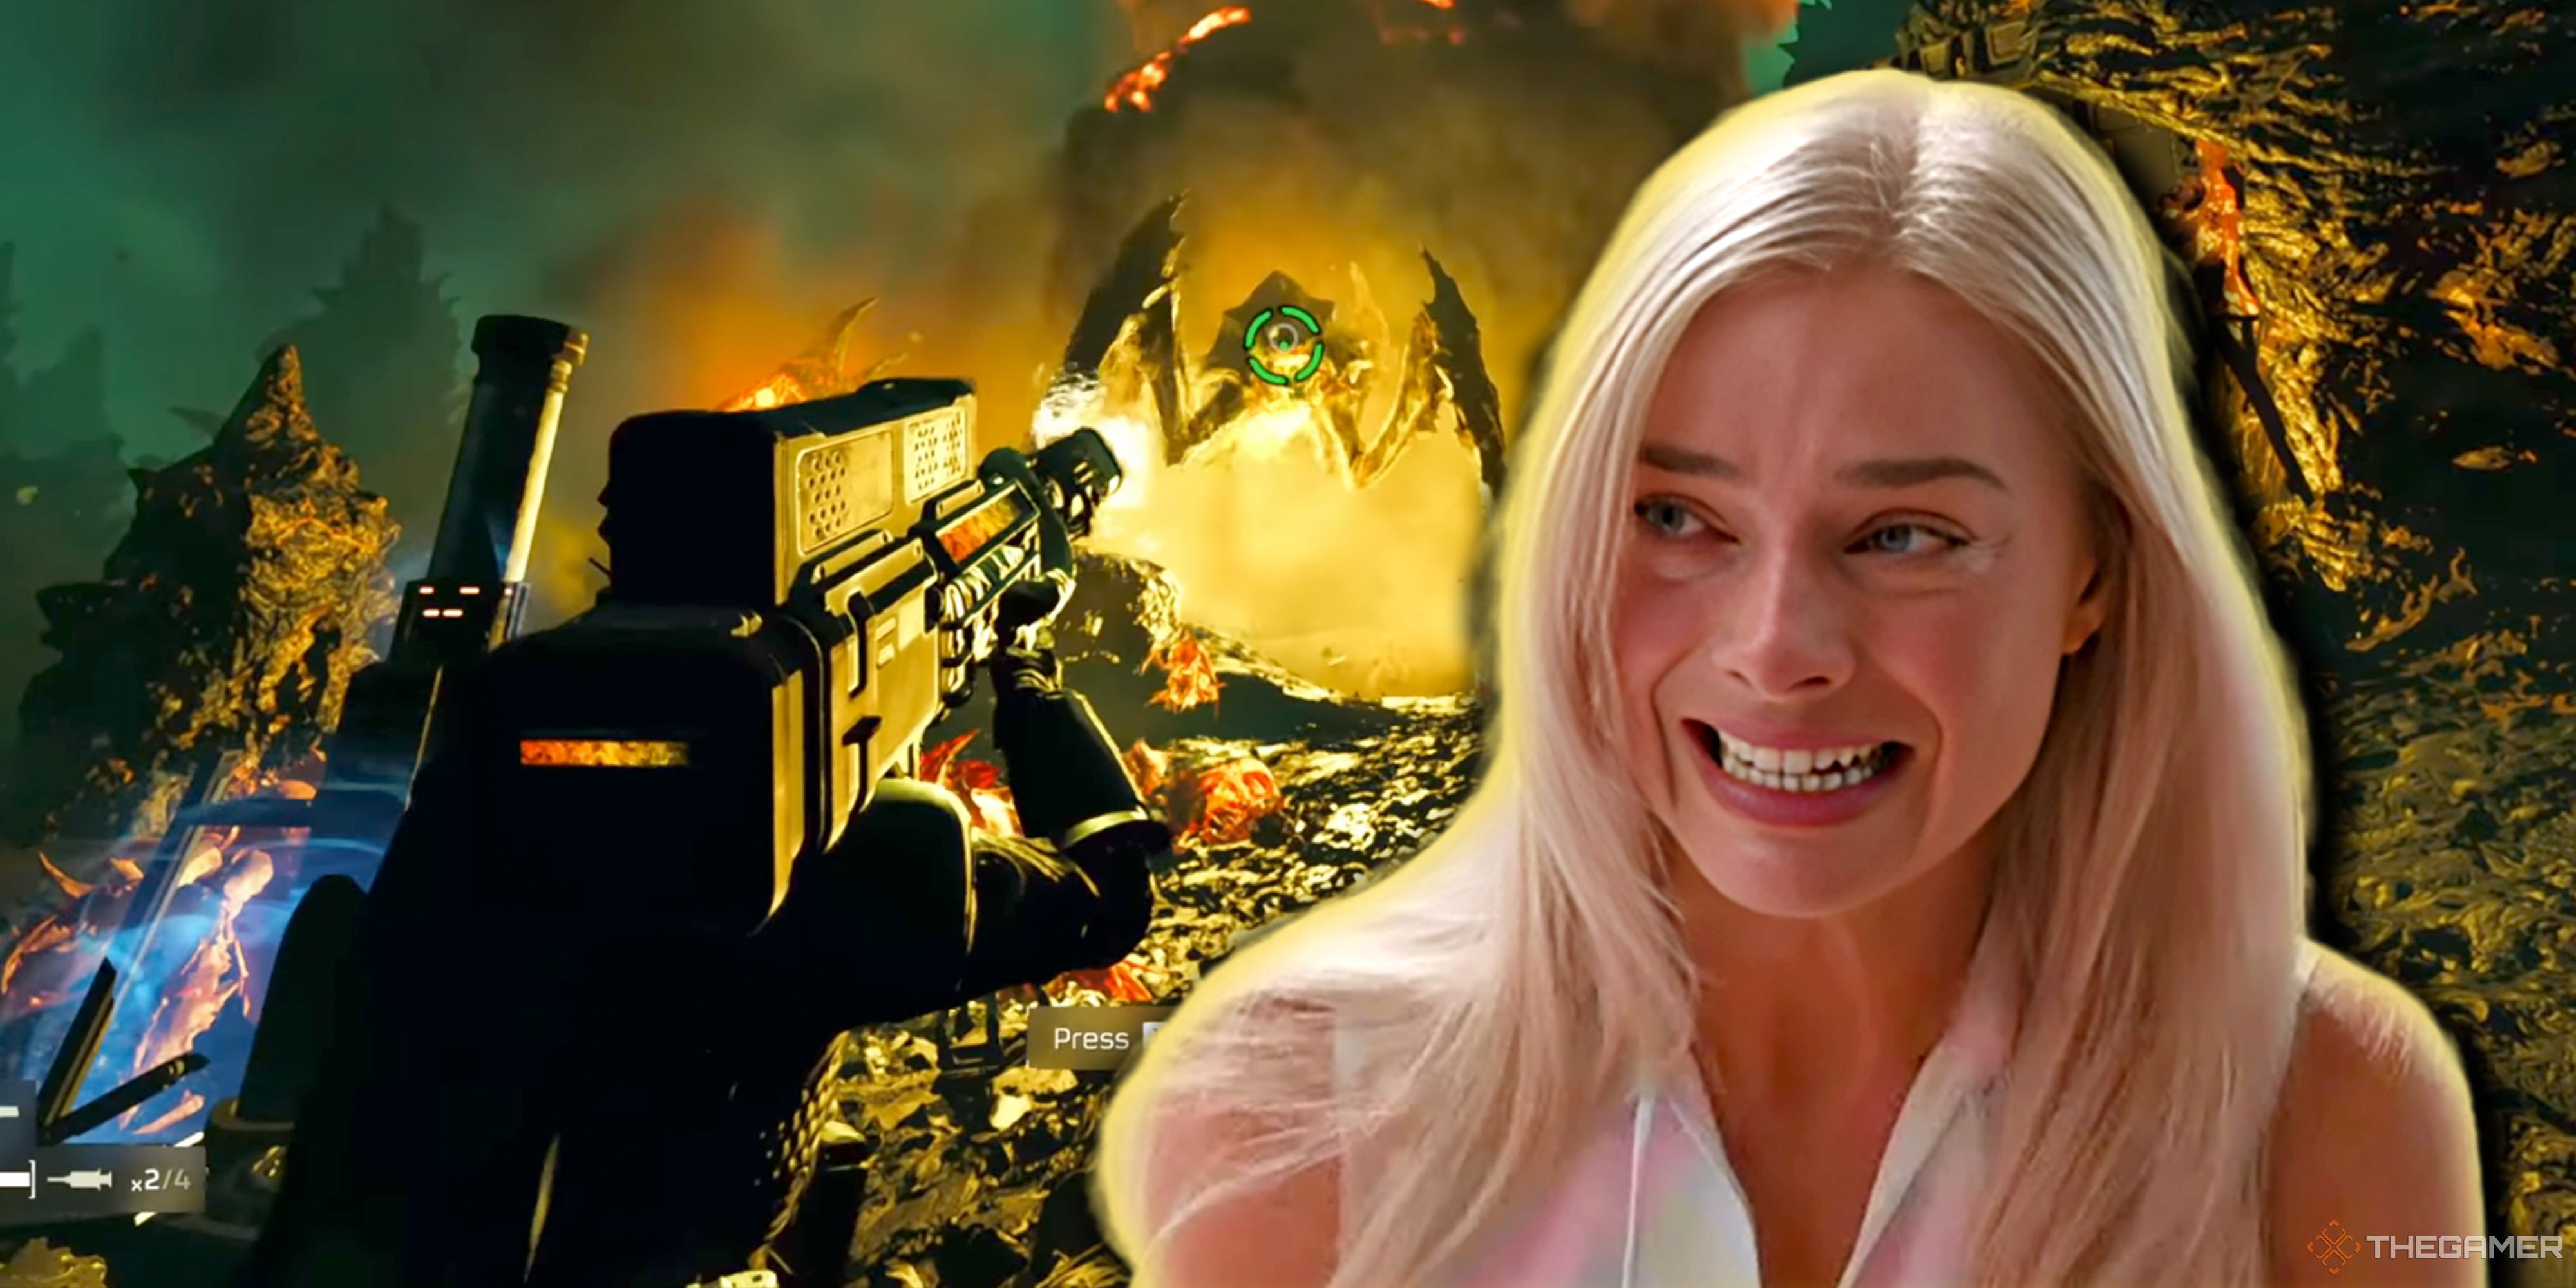 Margot Robbie as Barbie crying as a Helldiver shoots a Terminid in the background